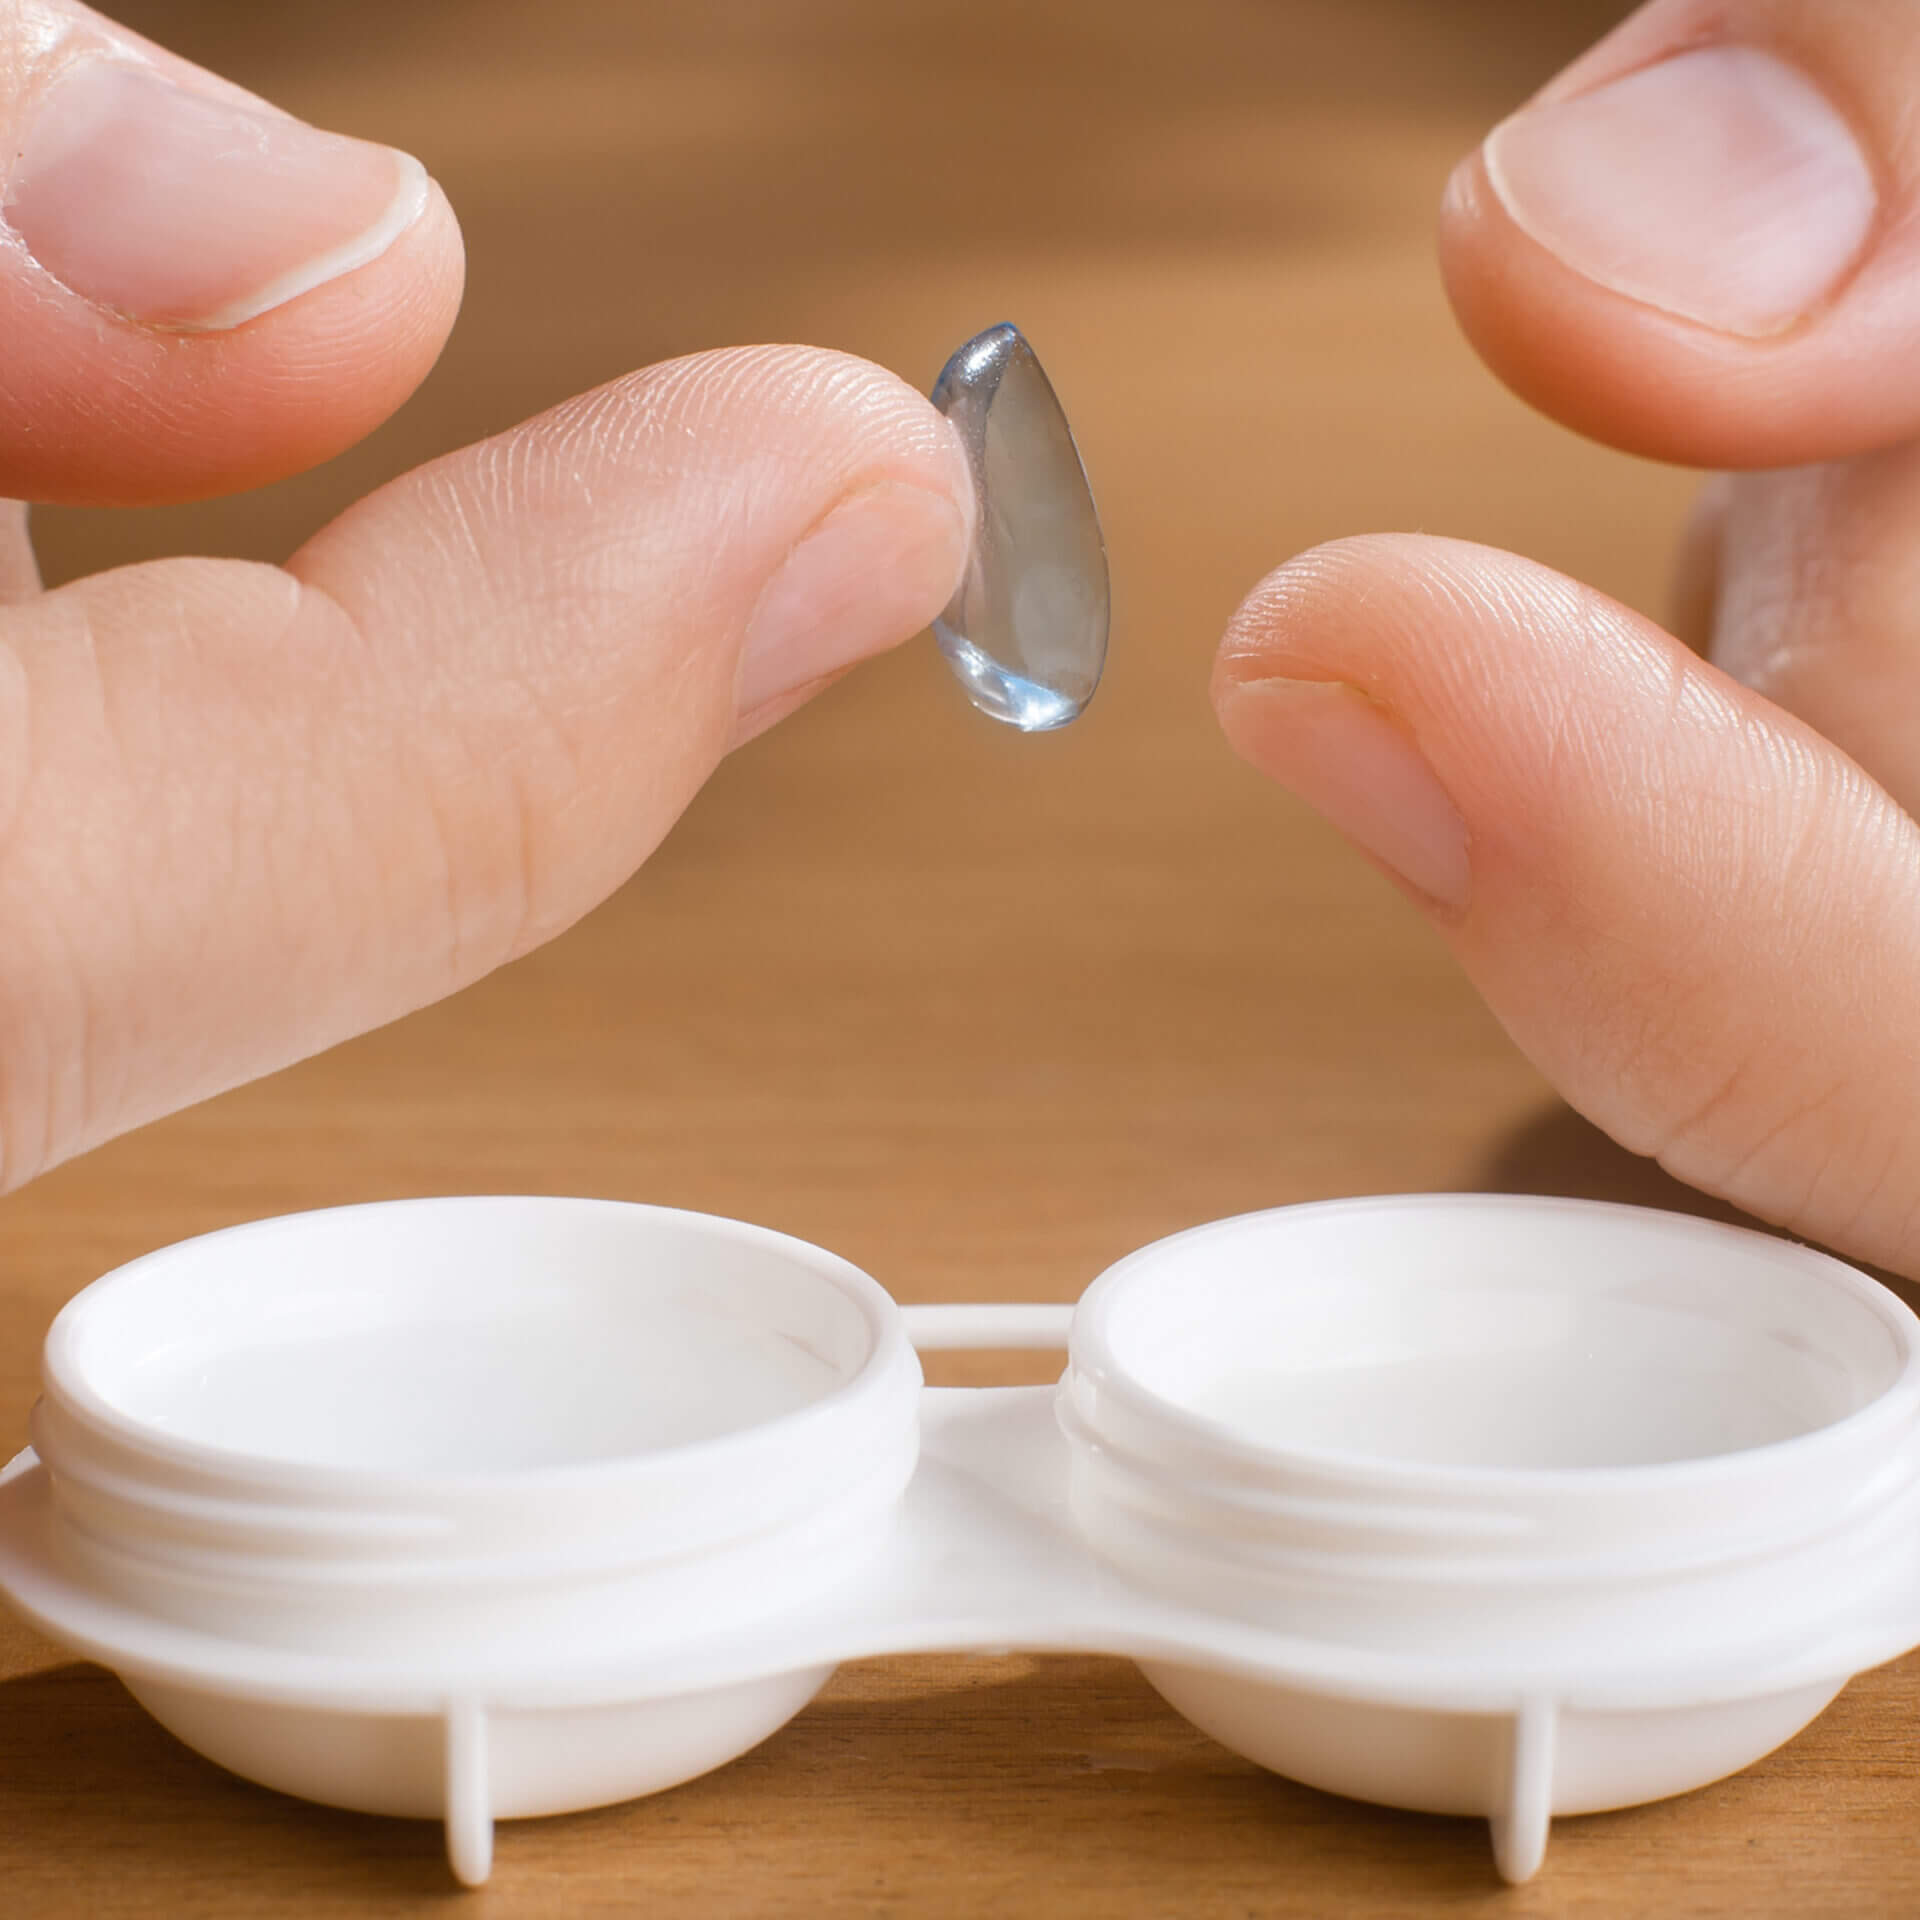 The contact lens materials for preventing complications cannot be overstated